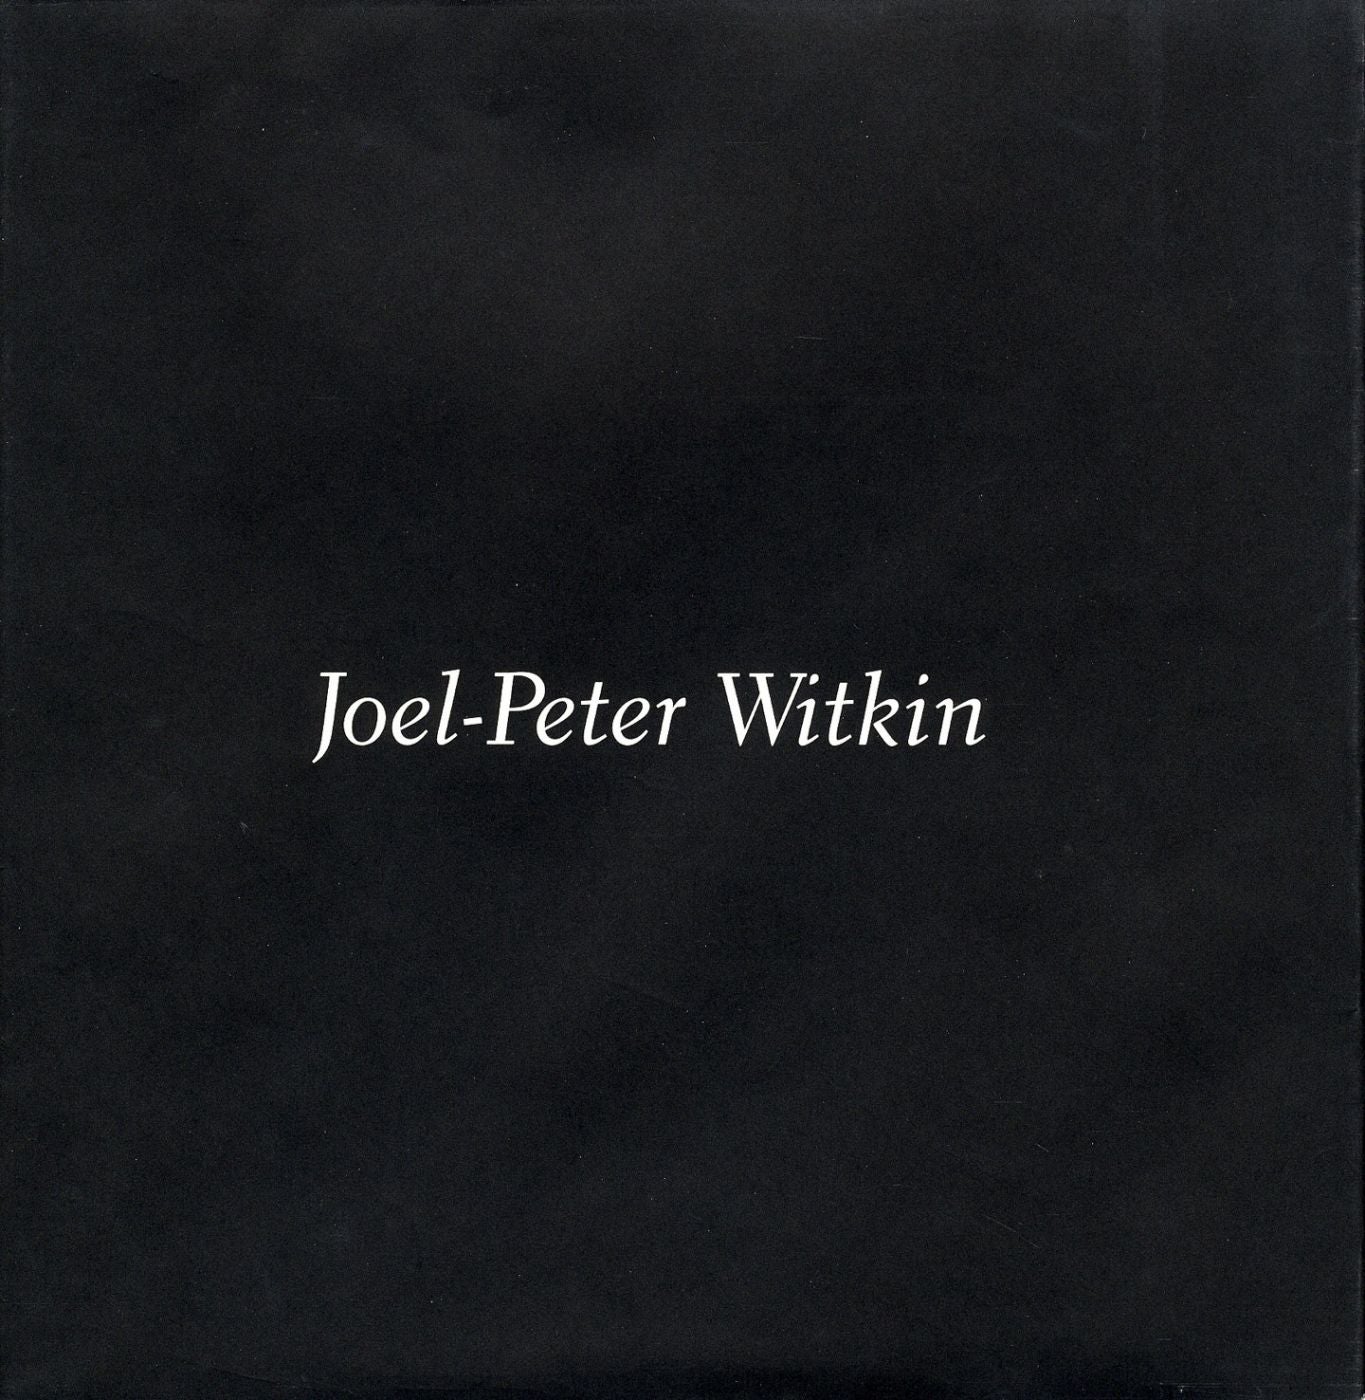 Joel-Peter Witkin Twelvetrees Press SIGNED by Joel-Peter WITKIN on Vincent  Borrelli, Bookseller